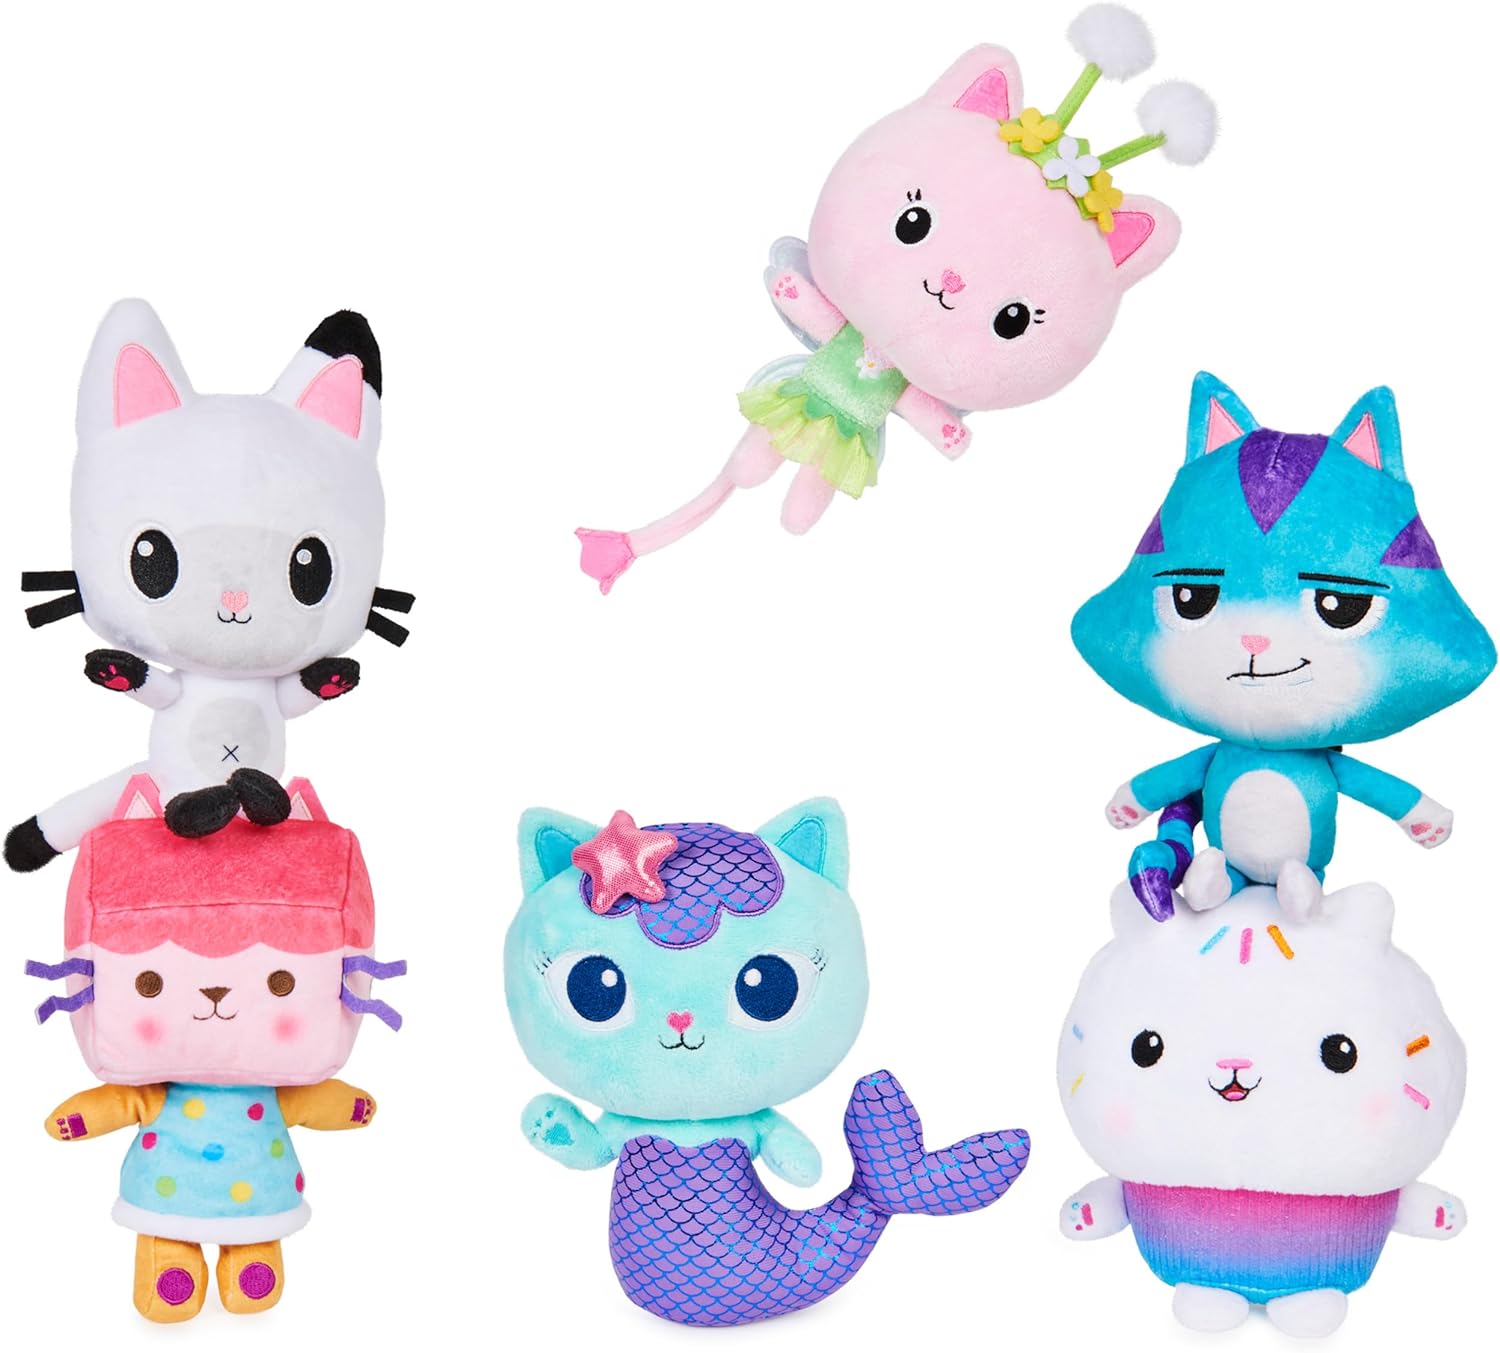 Gabby's Dollhouse, 8-inch Mercat Purr-ific Plush Toy, Kids Toys for Ages 3 and up